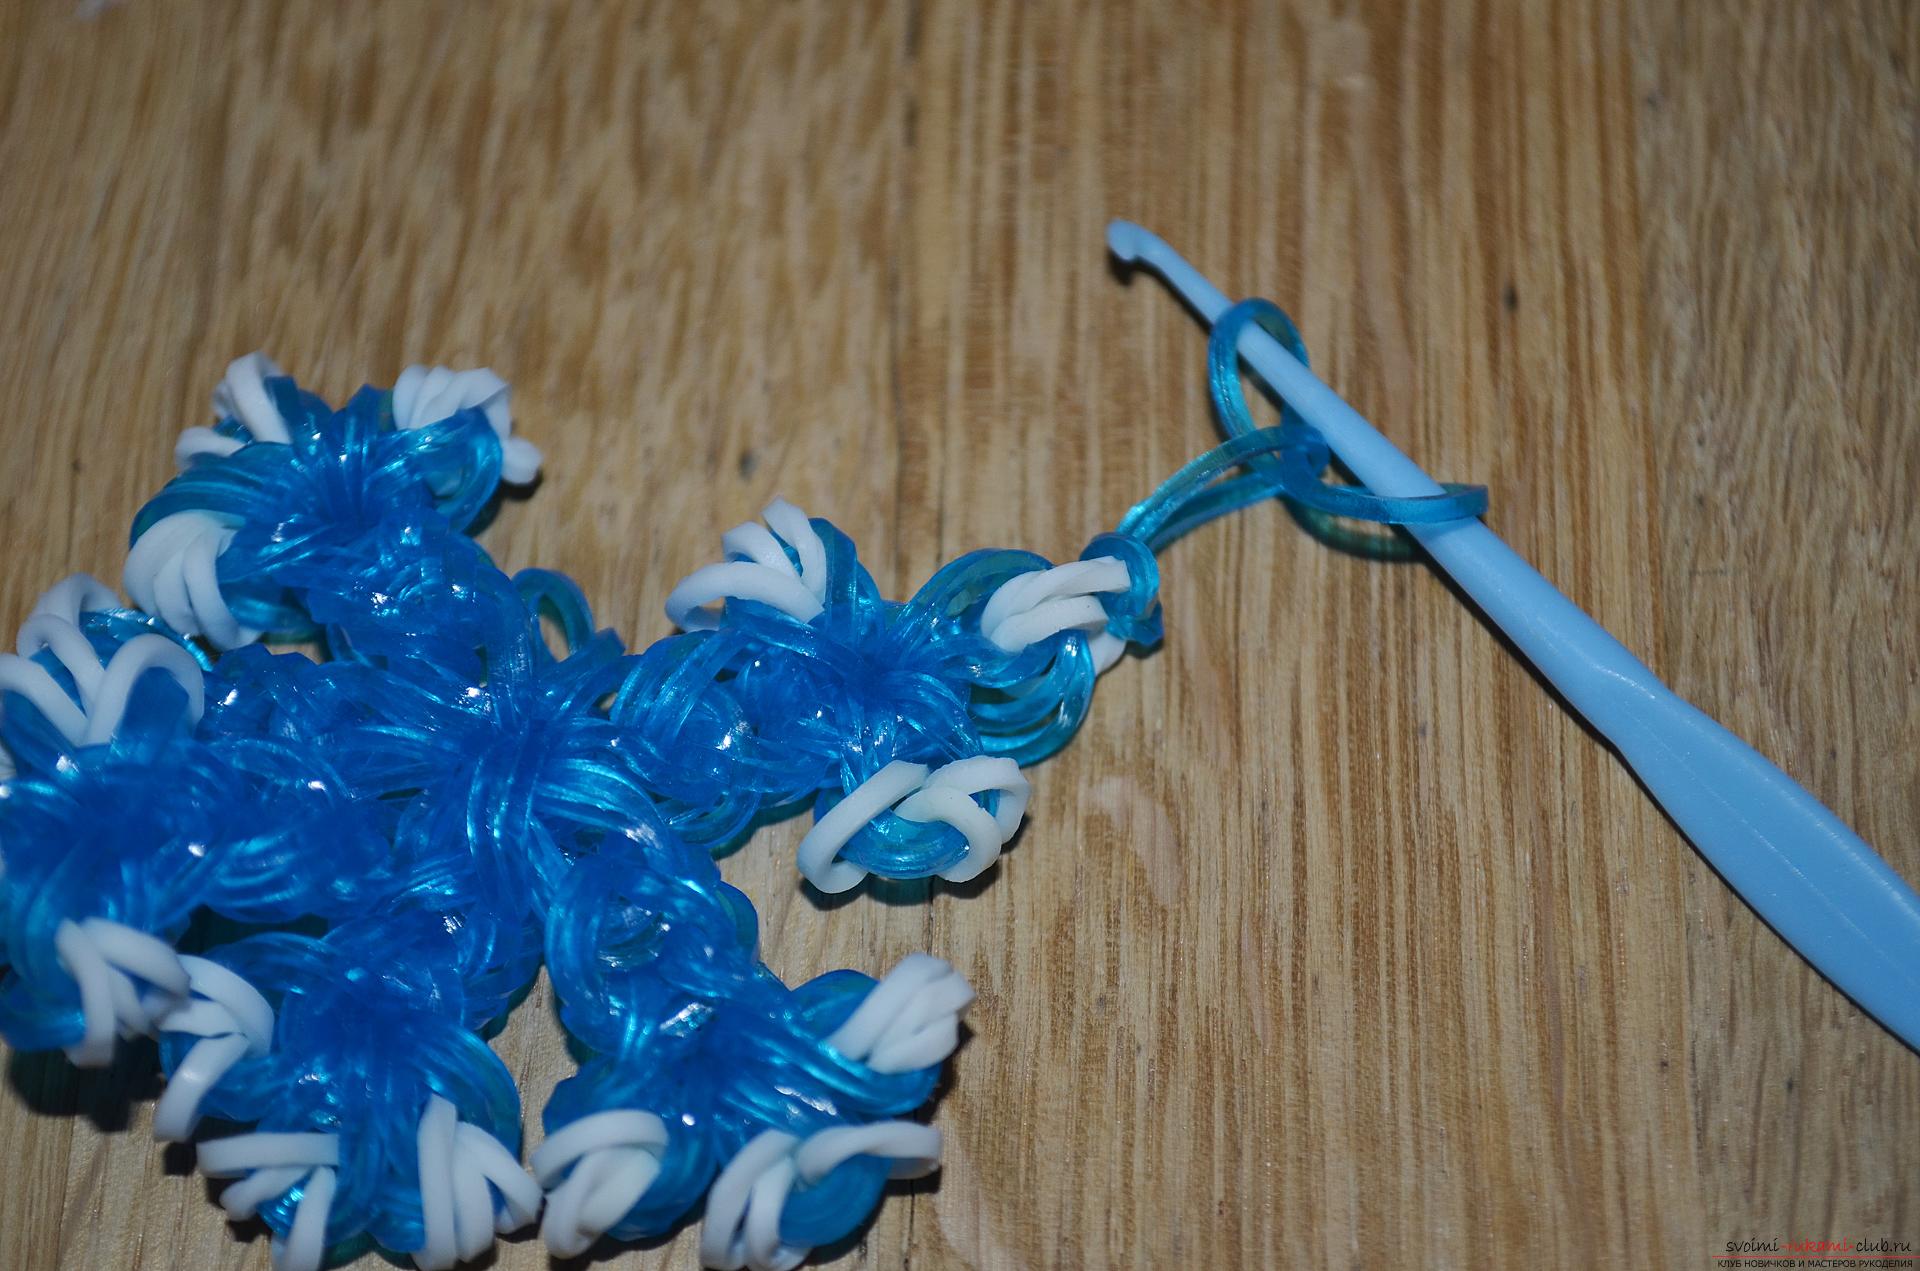 Photo for a lesson on weaving snowflakes from rubber bands. Photo # 24